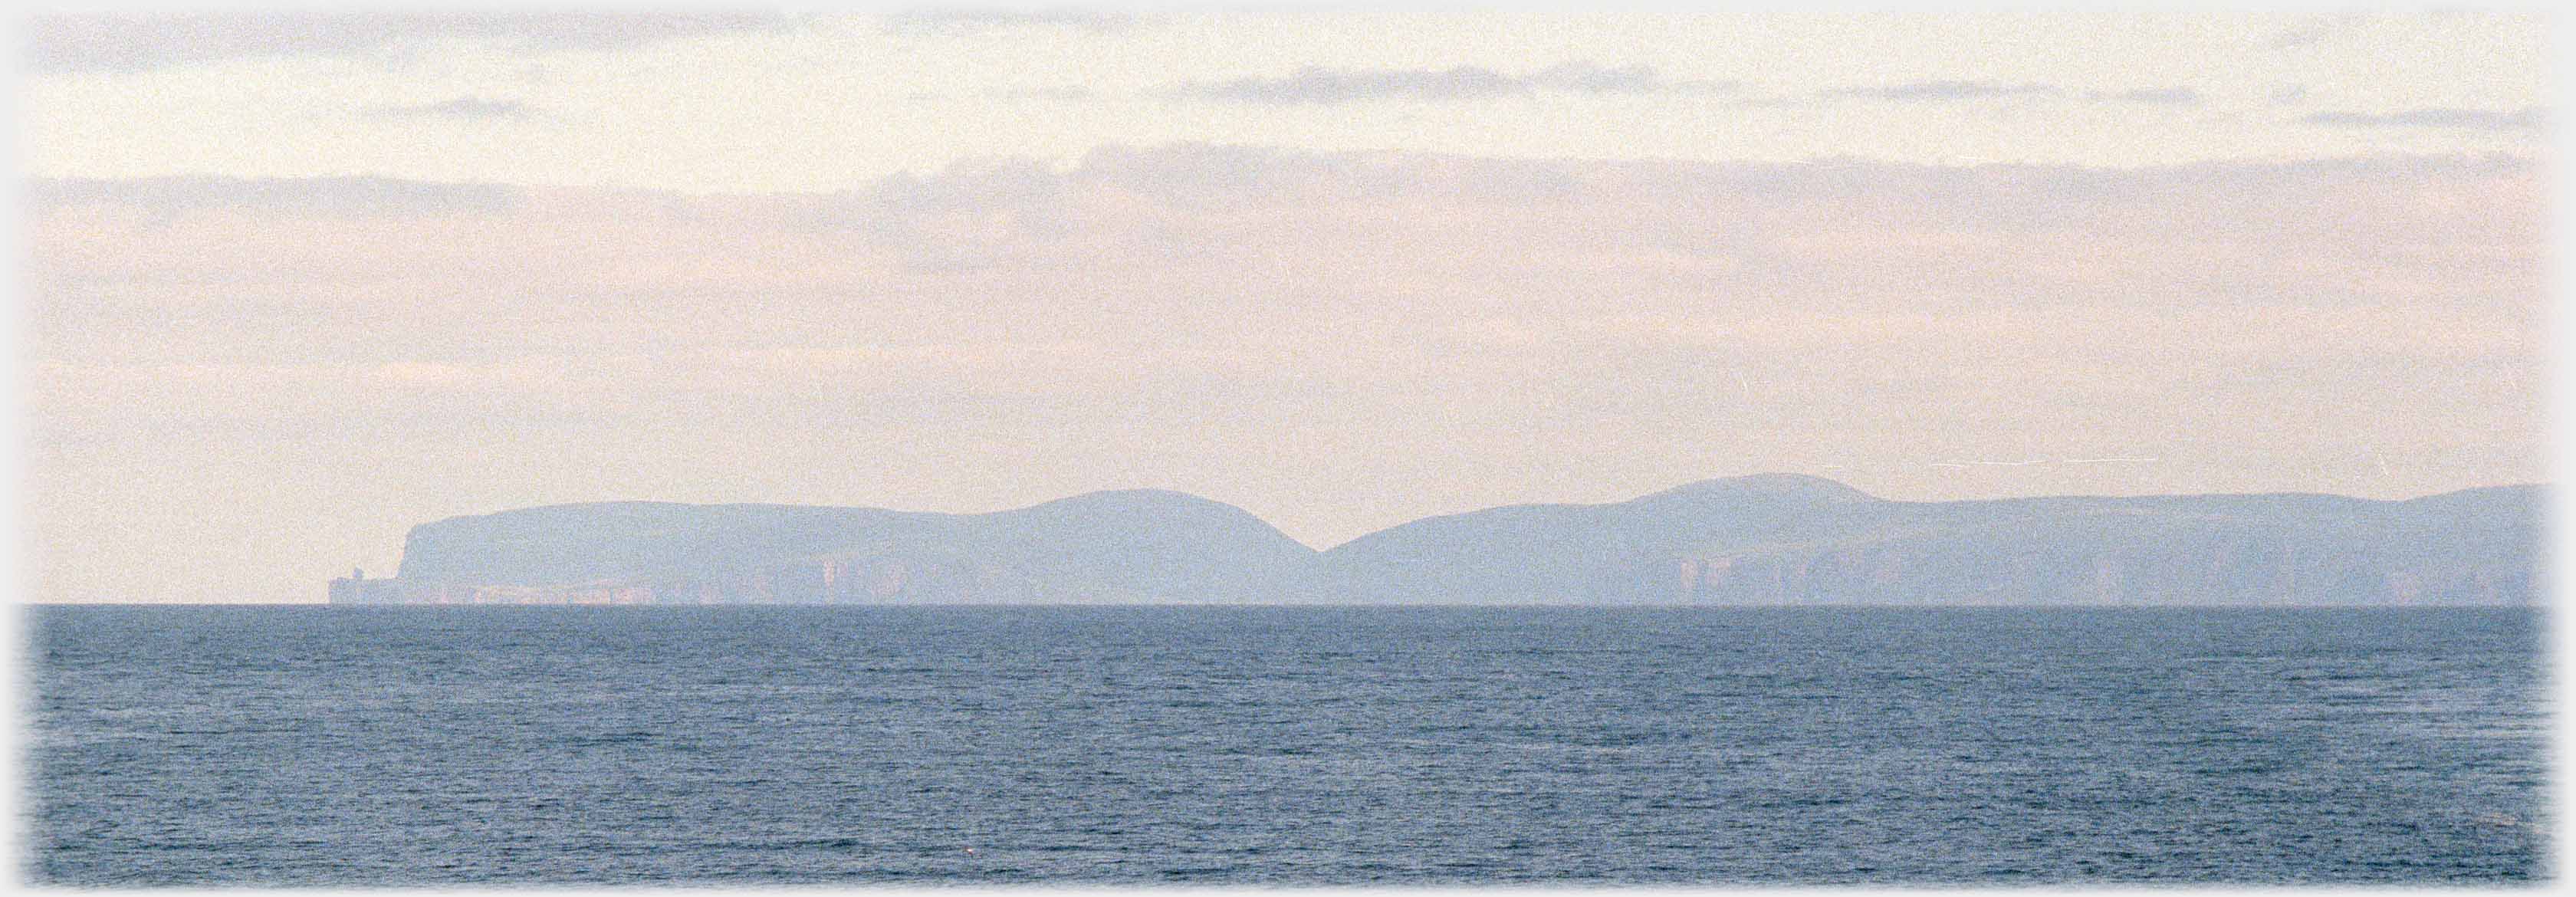 Silhouette of hills on island in evening across the sea.